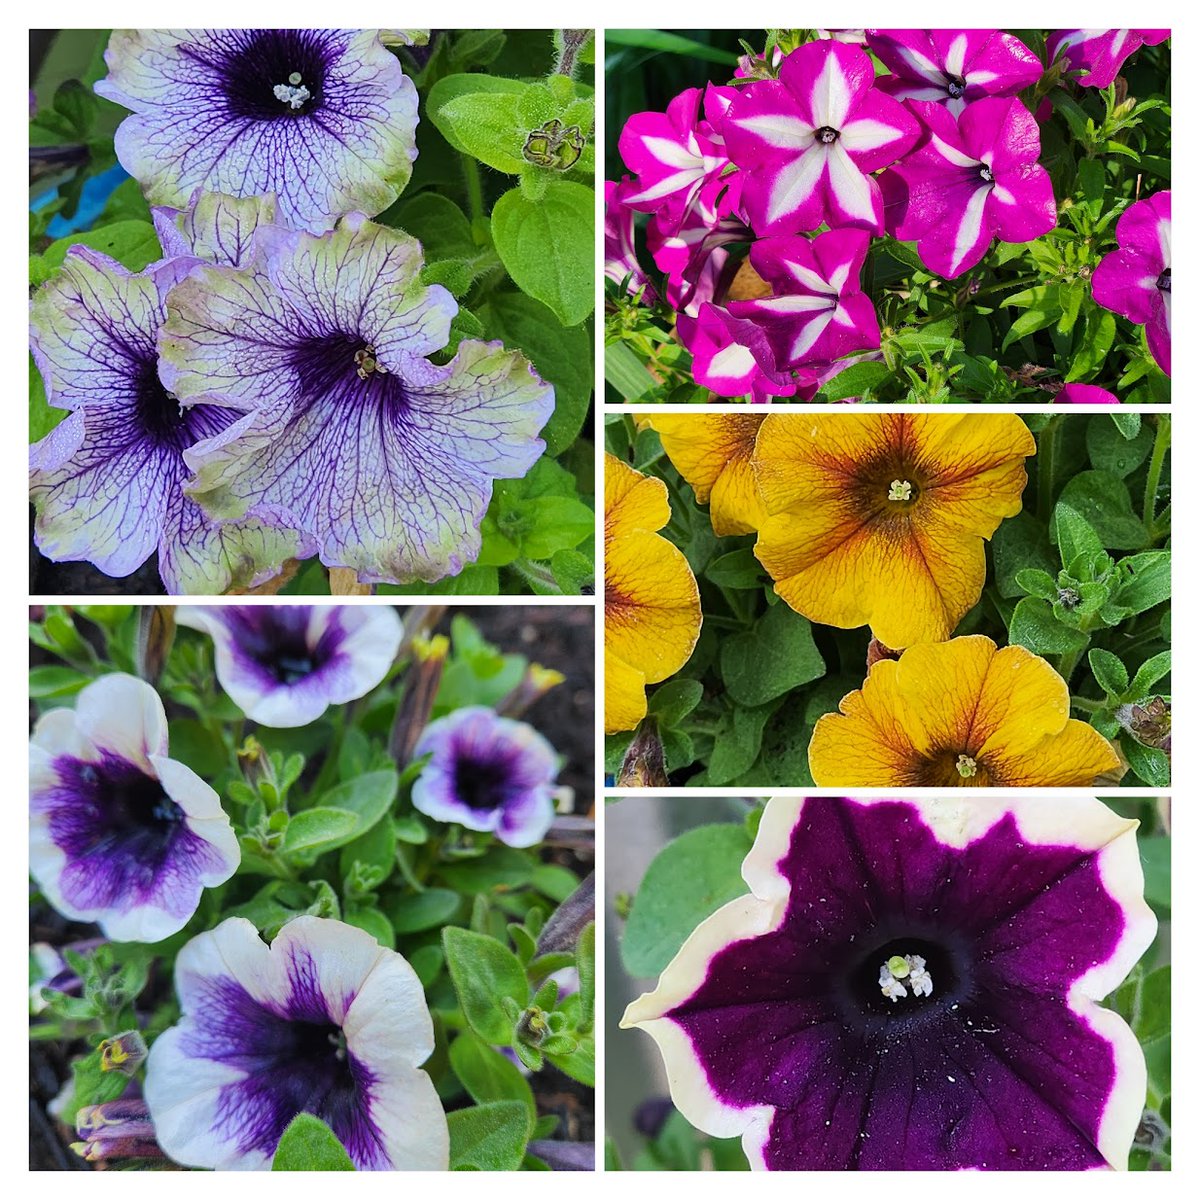 Every year, I'm like 'maybe I won't do petunias this year' and every year: